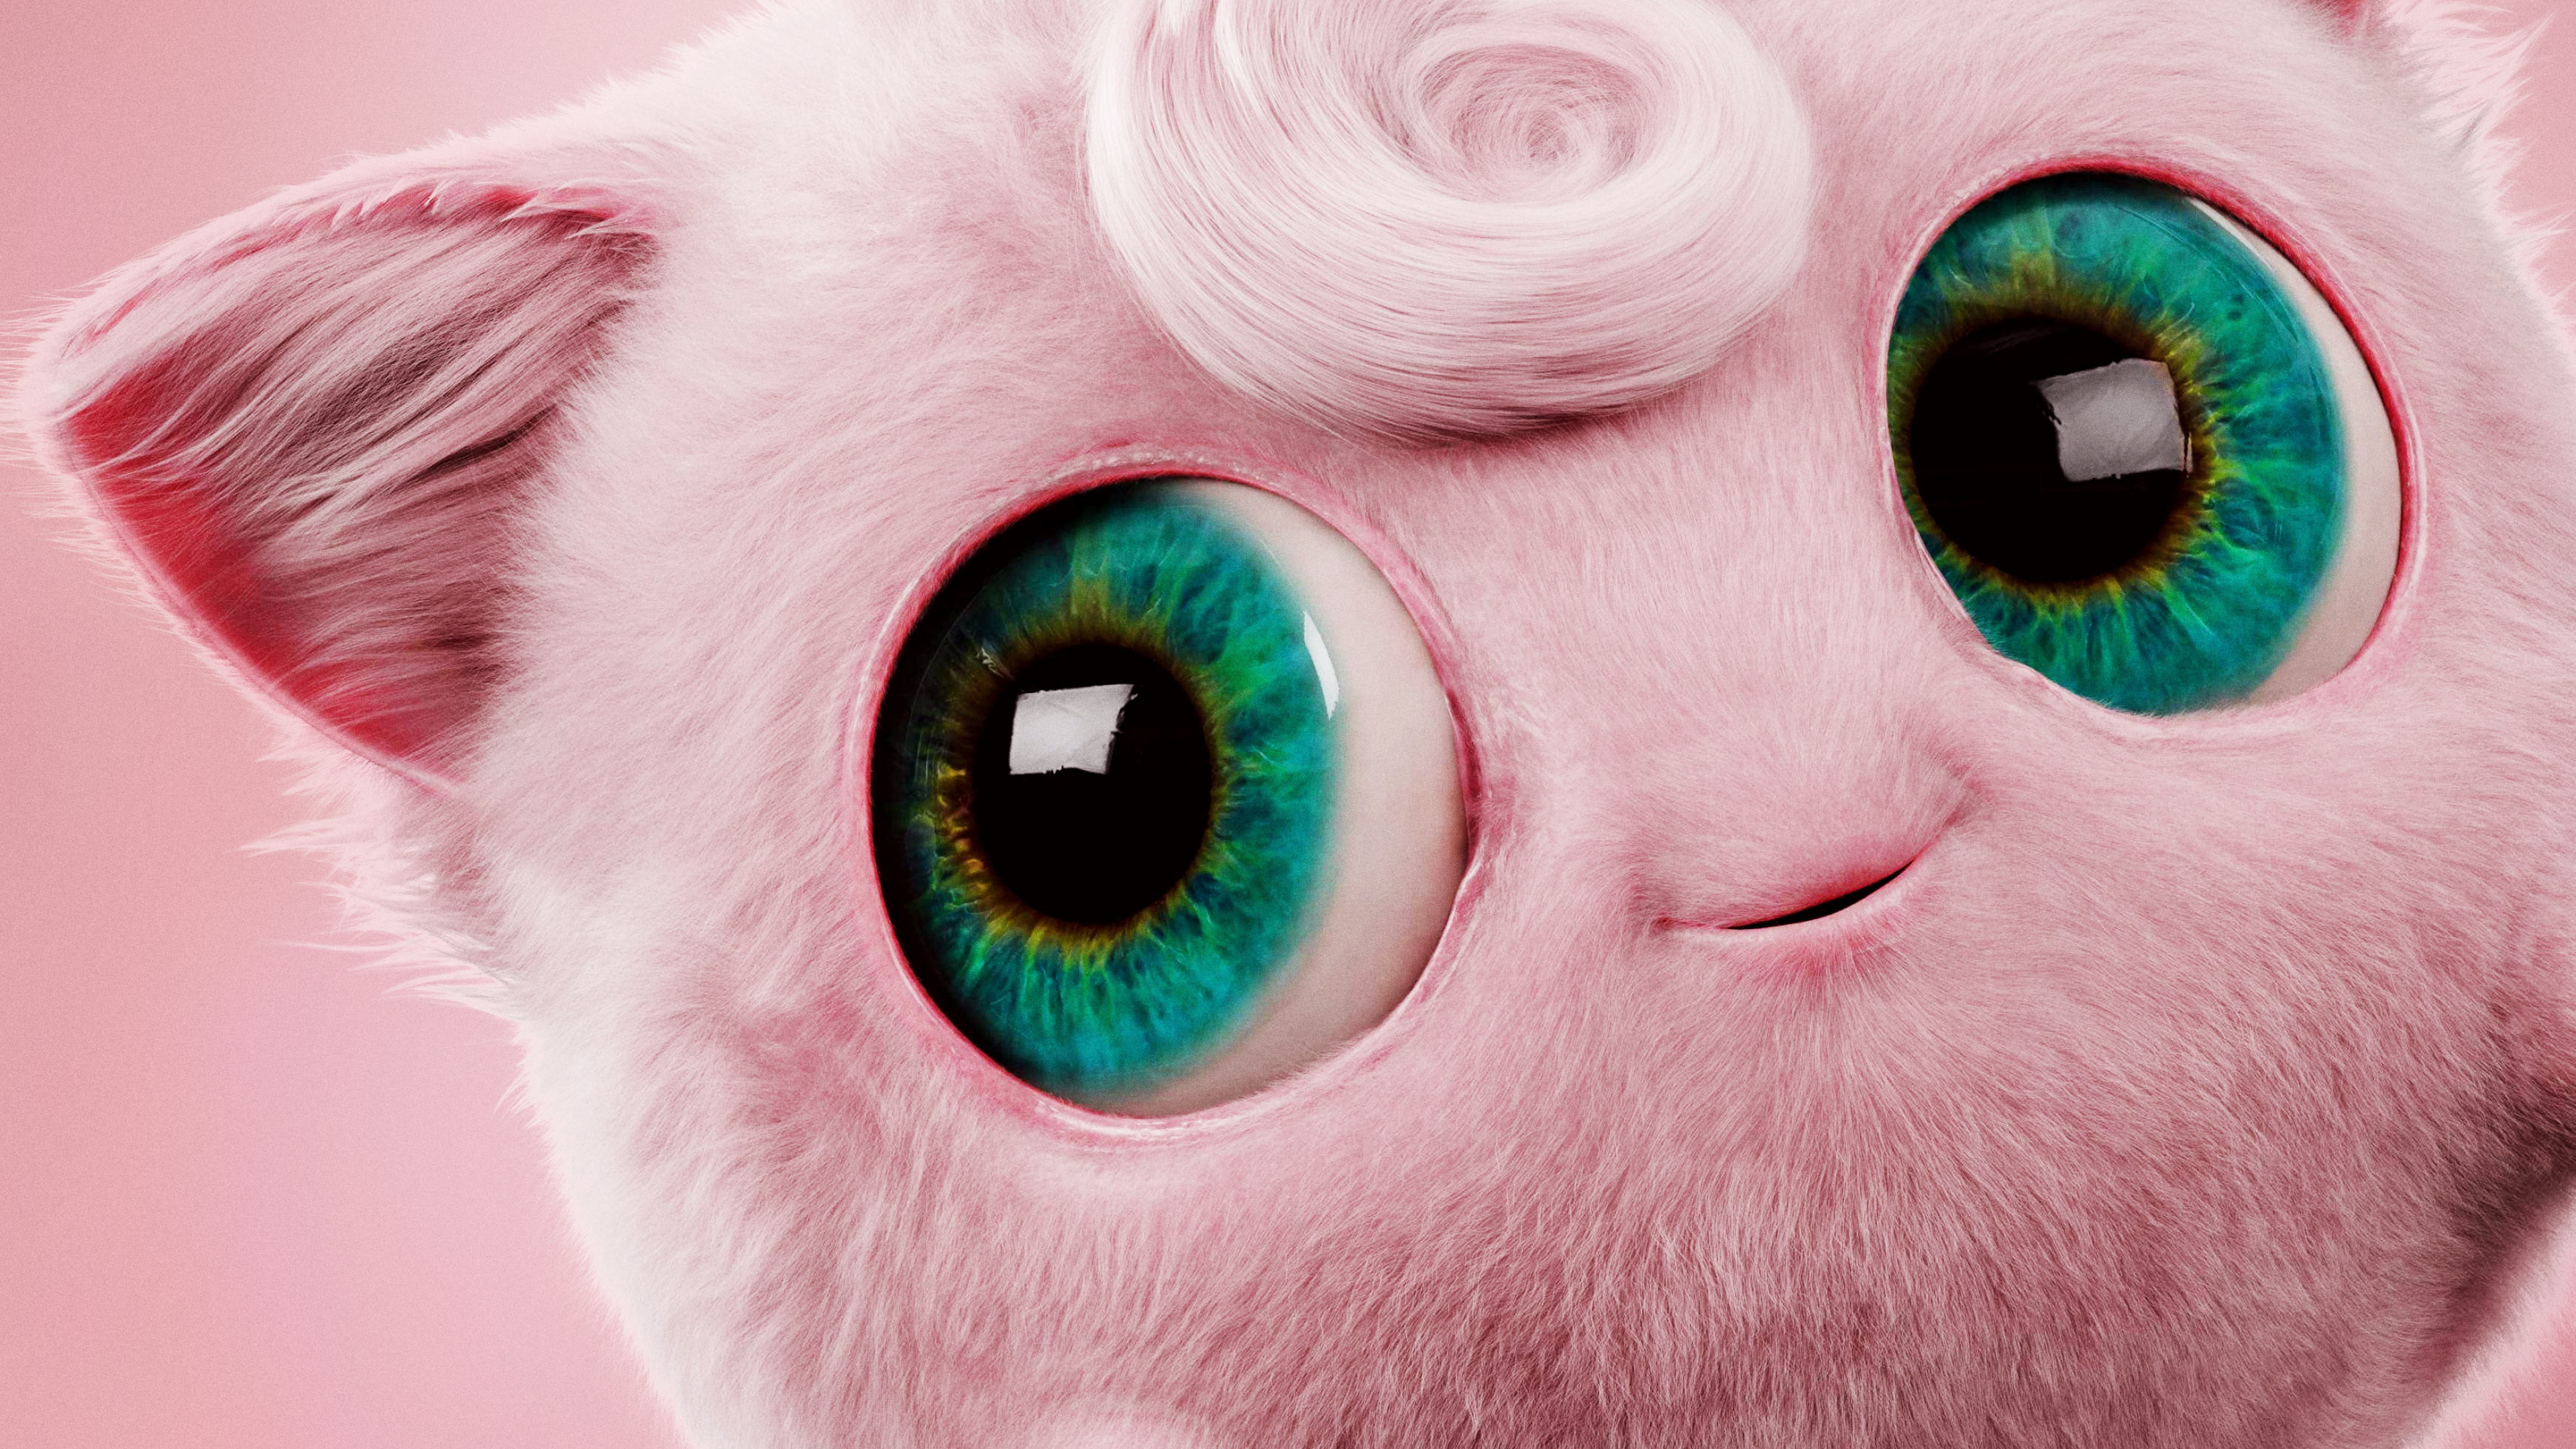 3840x2160 Jigglypuff In Pokemon Detective Pikachu Movie 4k Wallpaper Hd Movies 4k Wallpapers Images Photos And Background Wallpapers Den